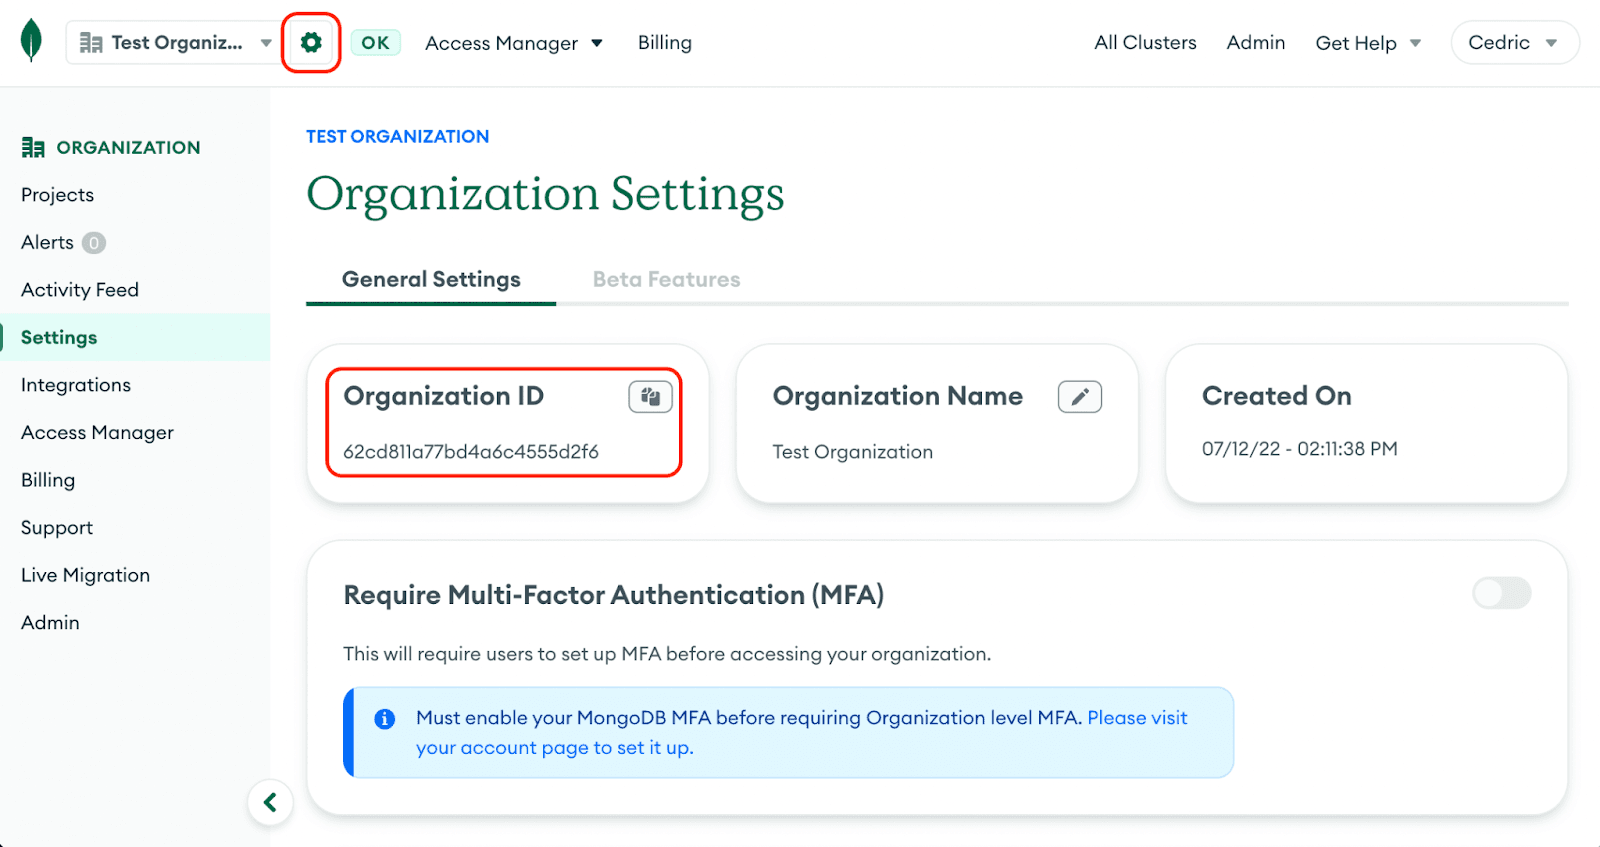 Navigating to the organization settings page